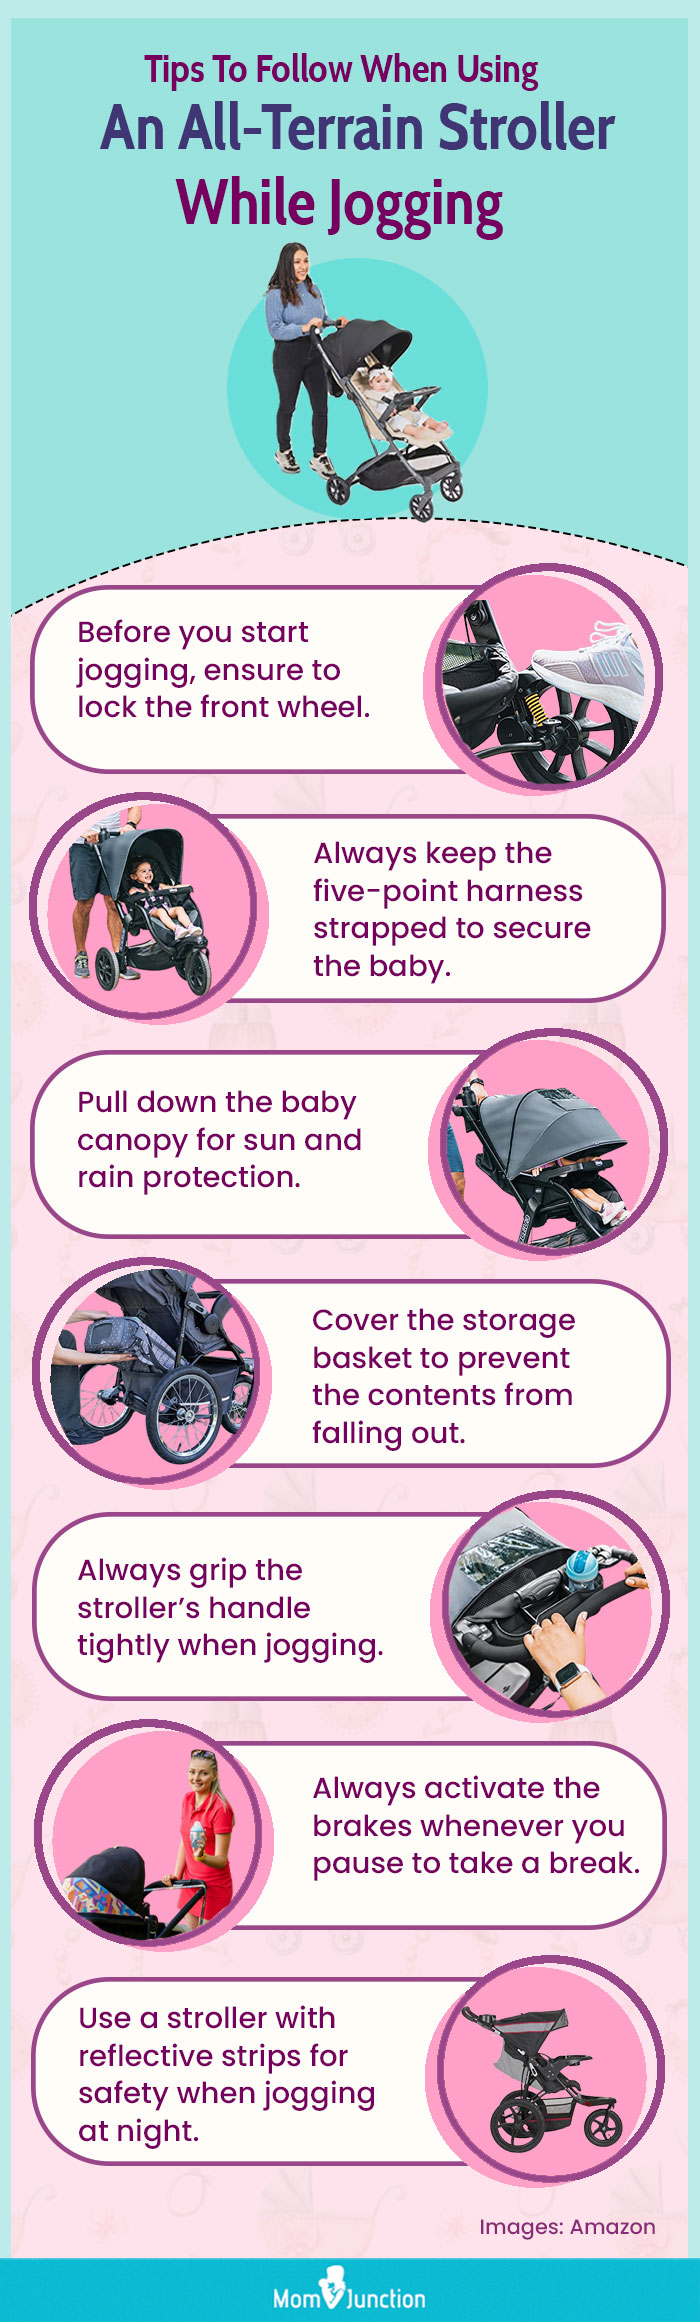 Tips To Follow When Using An All Terrain Stroller While Jogging (infographic)